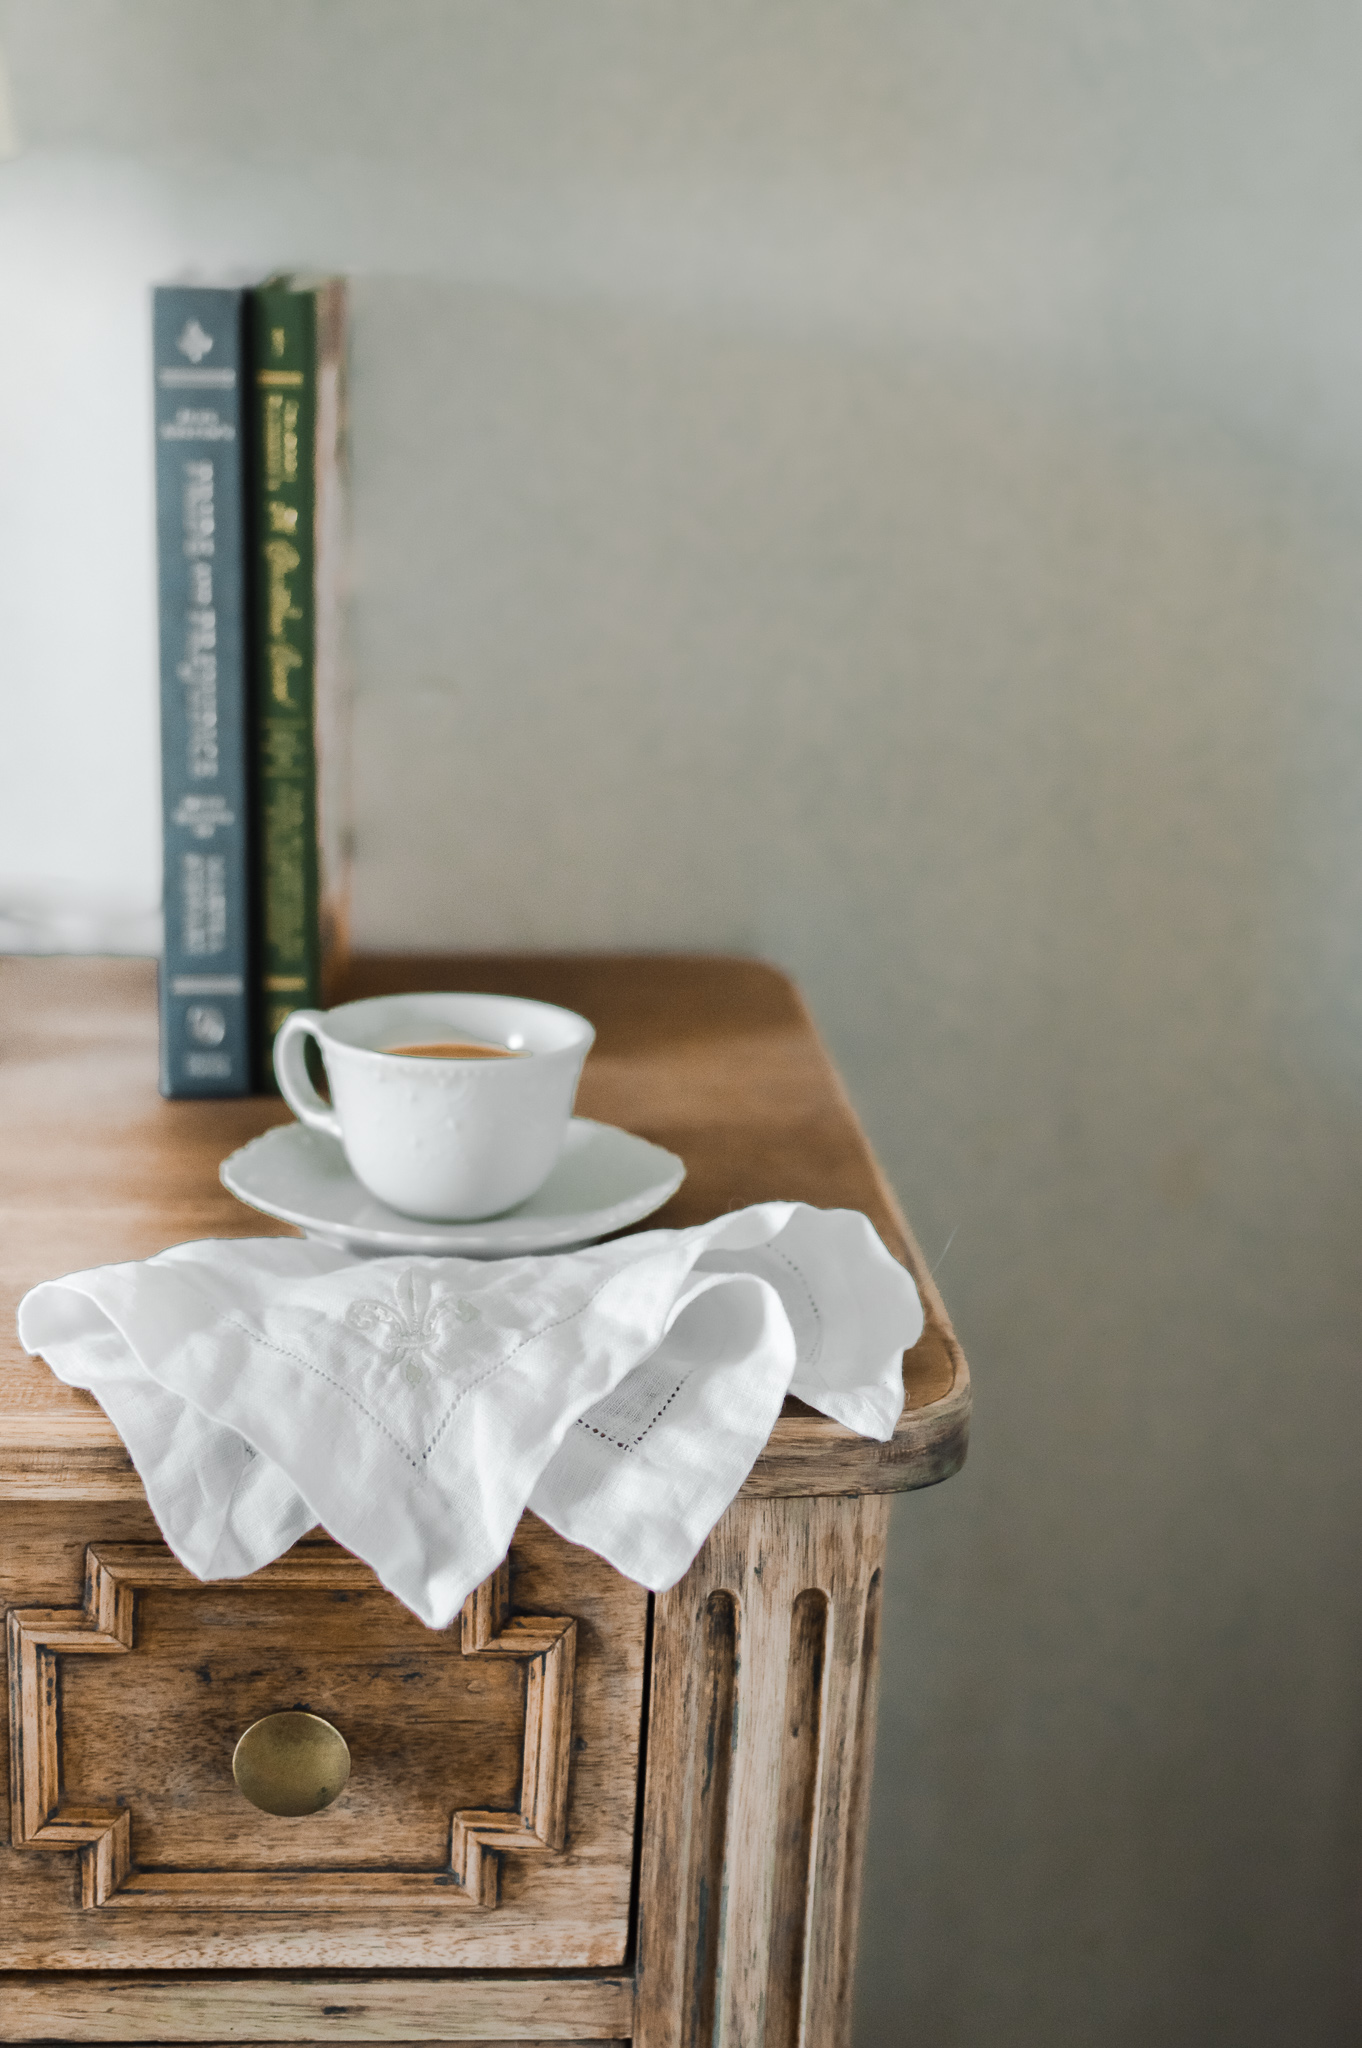 Why you should be using cloth napkins in your home